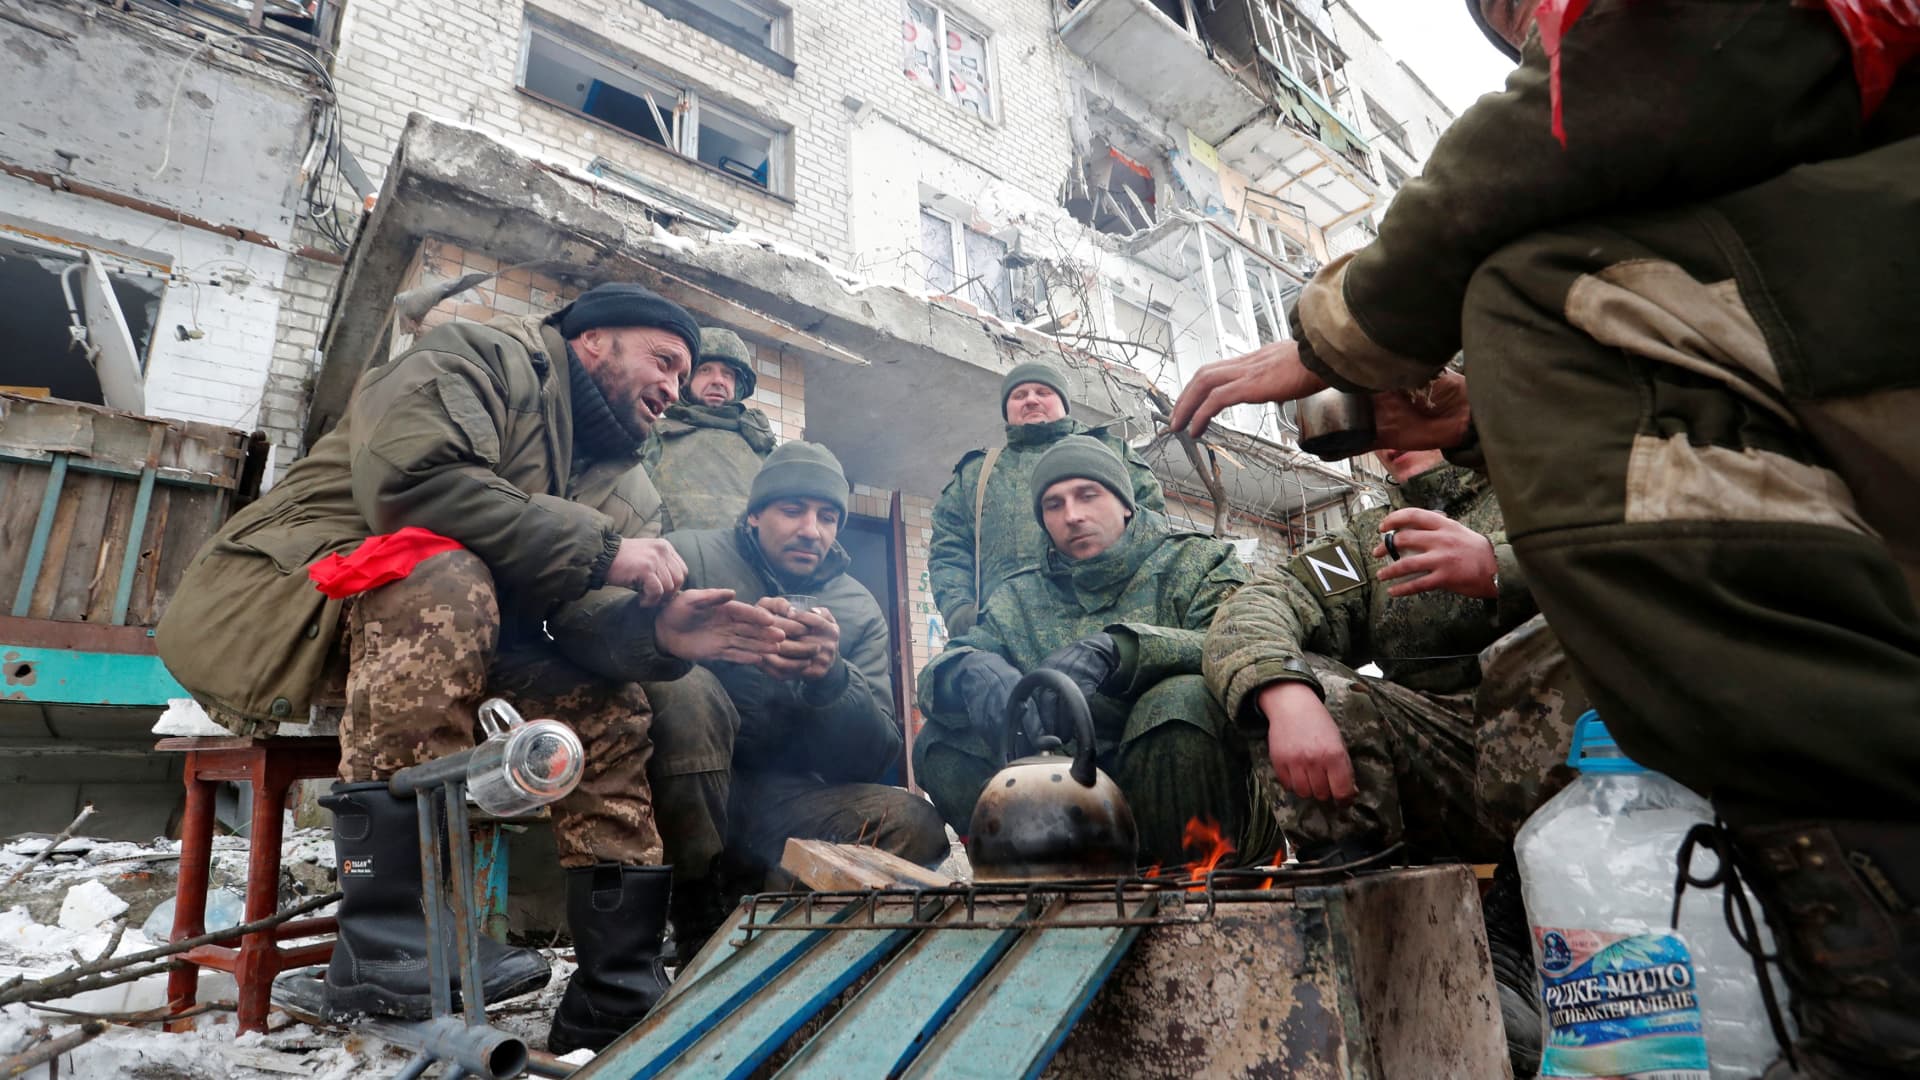 Service members of pro-Russian troops in uniforms without insignia gather around a fire outside a residential building which was damaged during Ukraine-Russia conflict in the separatist-controlled town of Volnovakha in the Donetsk region, Ukraine March 11, 2022.